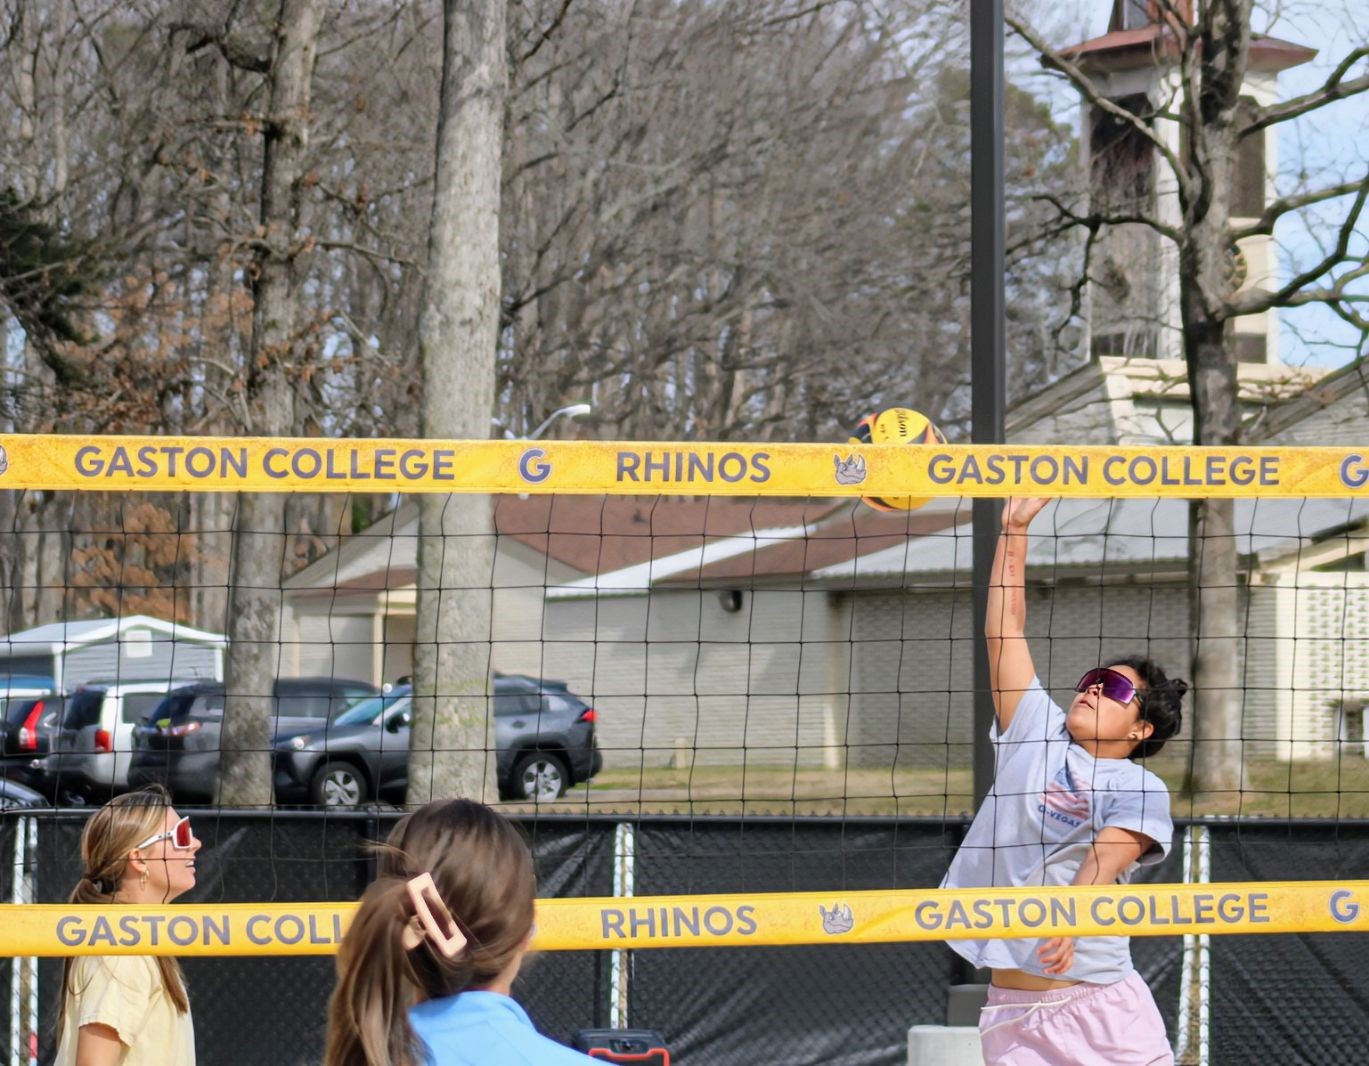 Gaston College Valentina Rodriguez during a recent practice session picked up a win in the Rhinos' first victory of the season with her Pair No. 1 partner Cristina Rotola